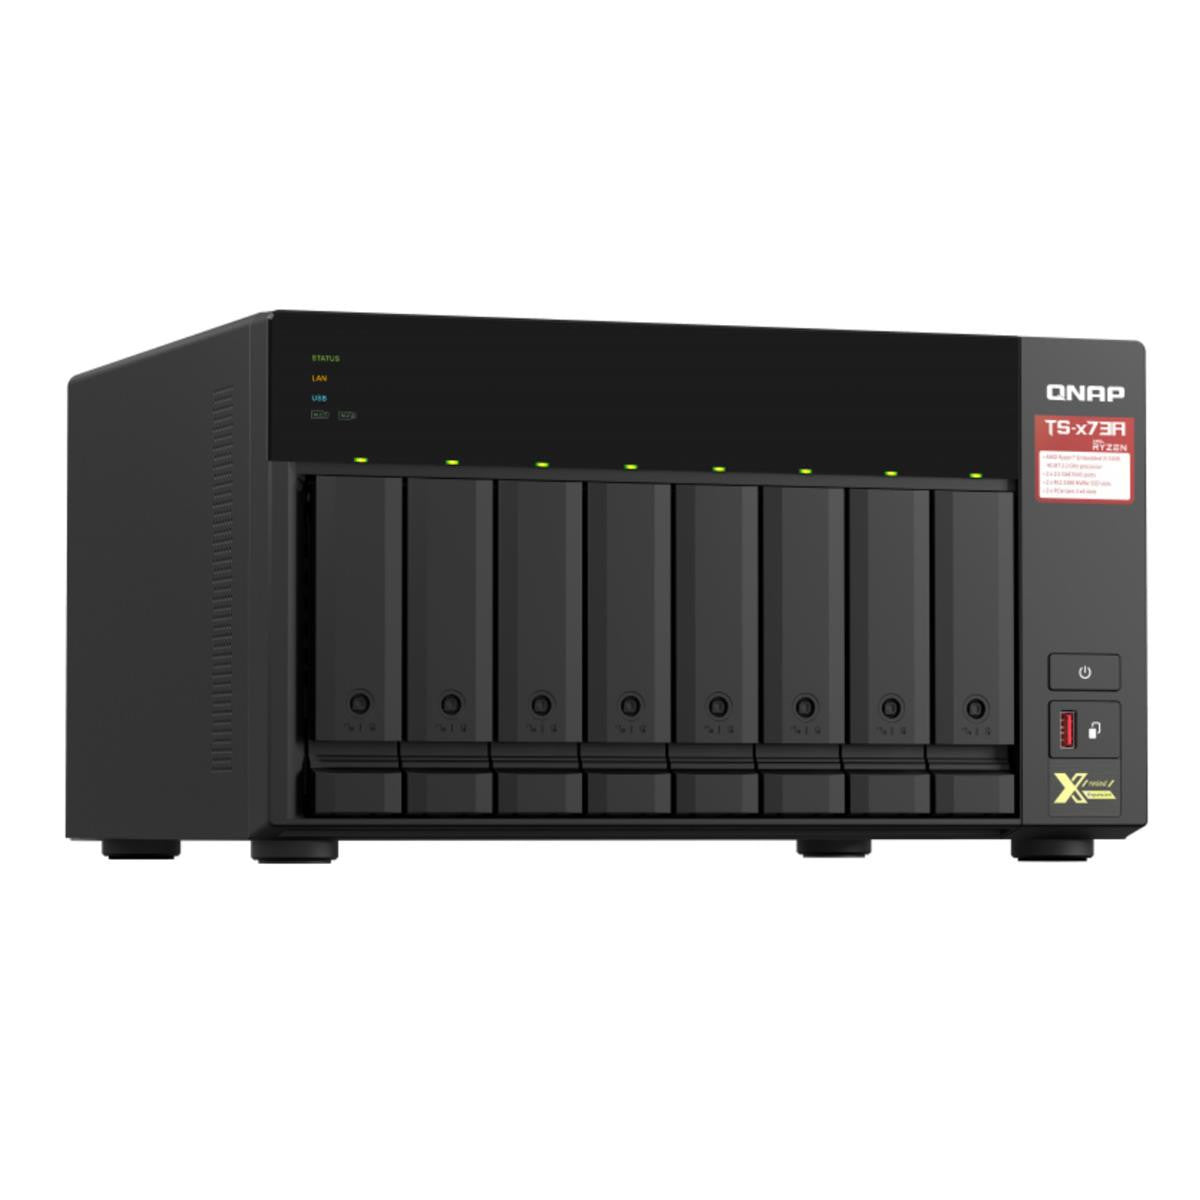 QNAP TS-873A 8-BAY NAS with 8GB DDR4 RAM and 112TB (8x14TB) Western Digital RED PLUS Drives Fully Assembled and Tested